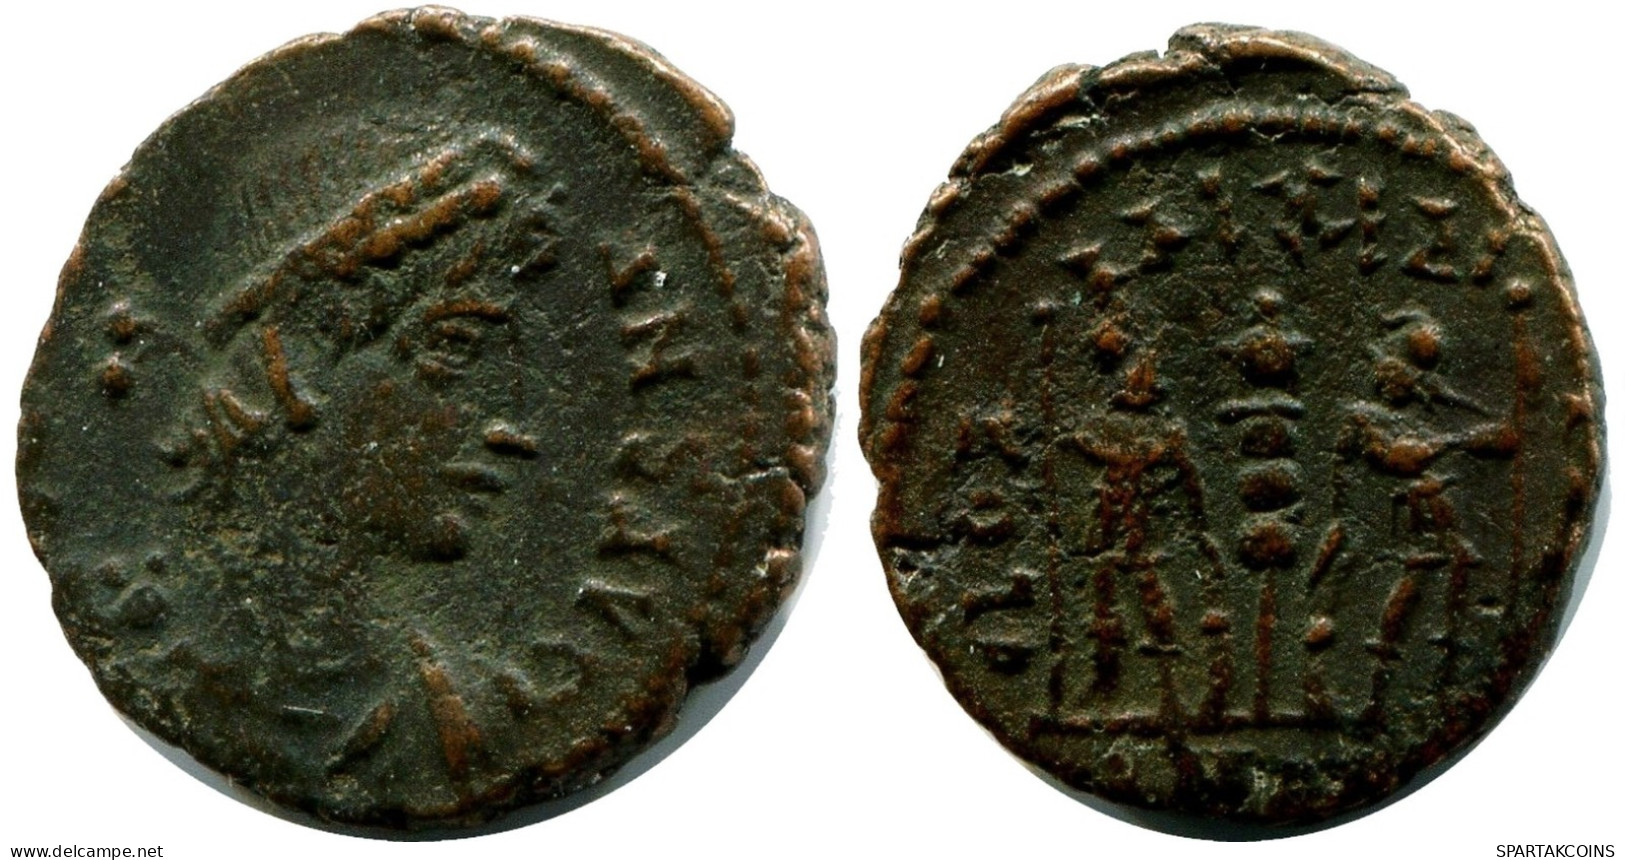 CONSTANS MINTED IN ANTIOCH FOUND IN IHNASYAH HOARD EGYPT #ANC11849.14.E.A - El Impero Christiano (307 / 363)